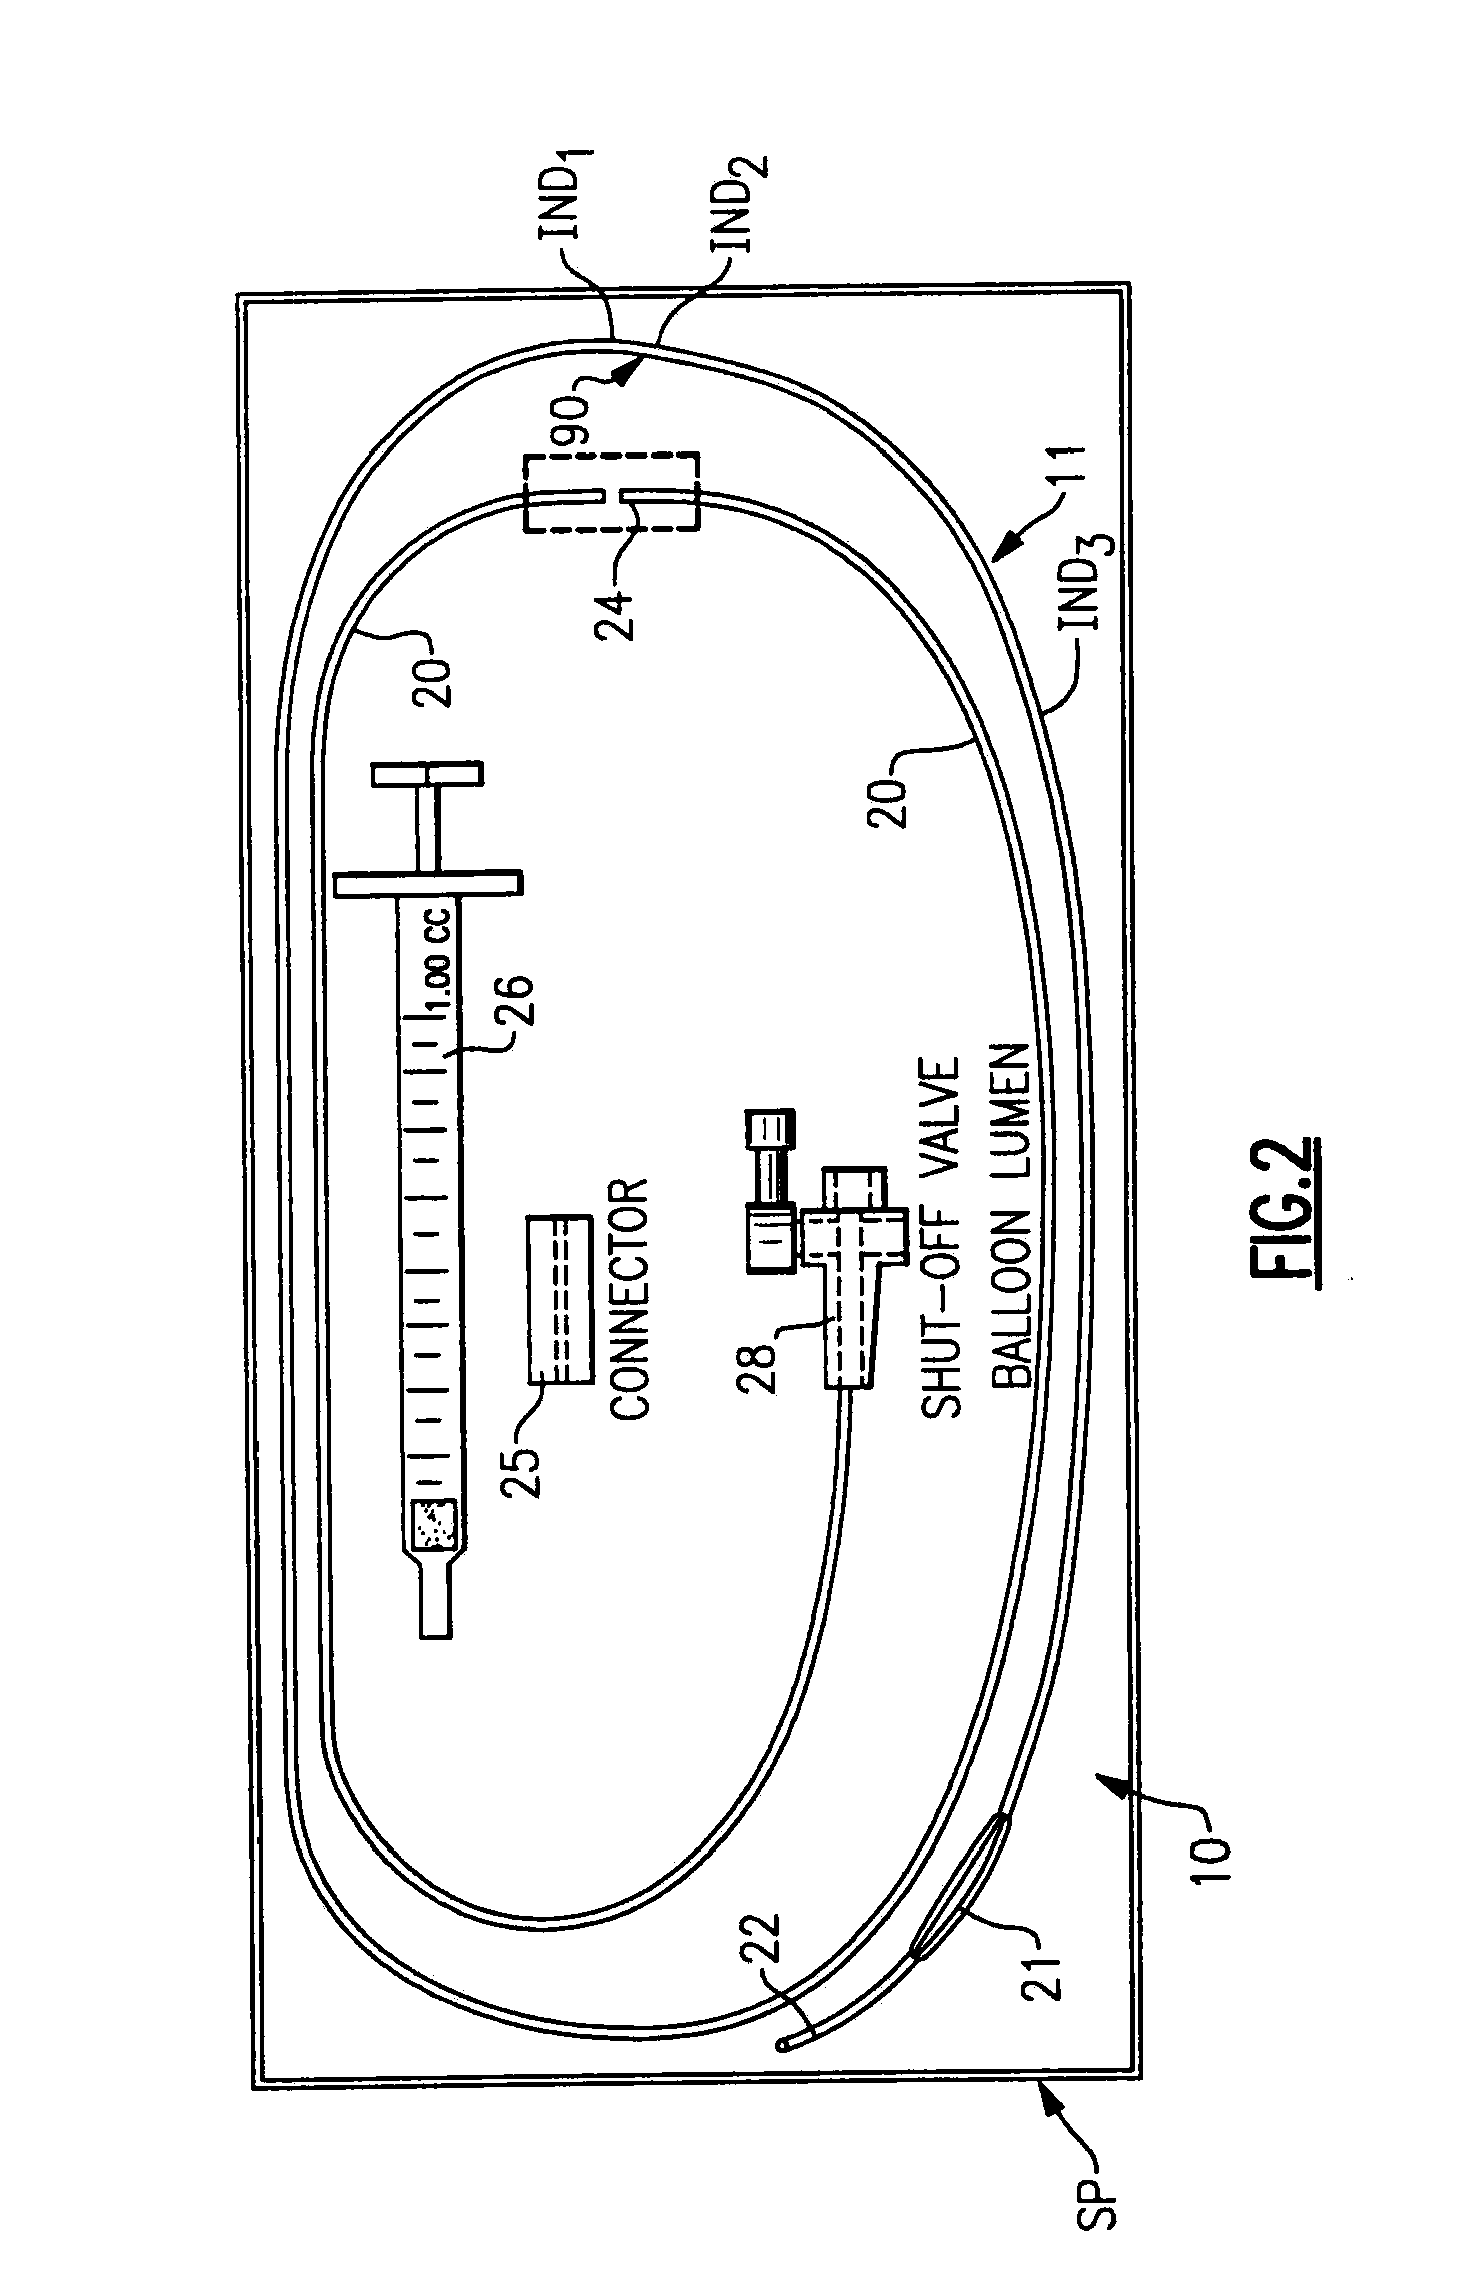 Percutaneous Puncture Sealing System